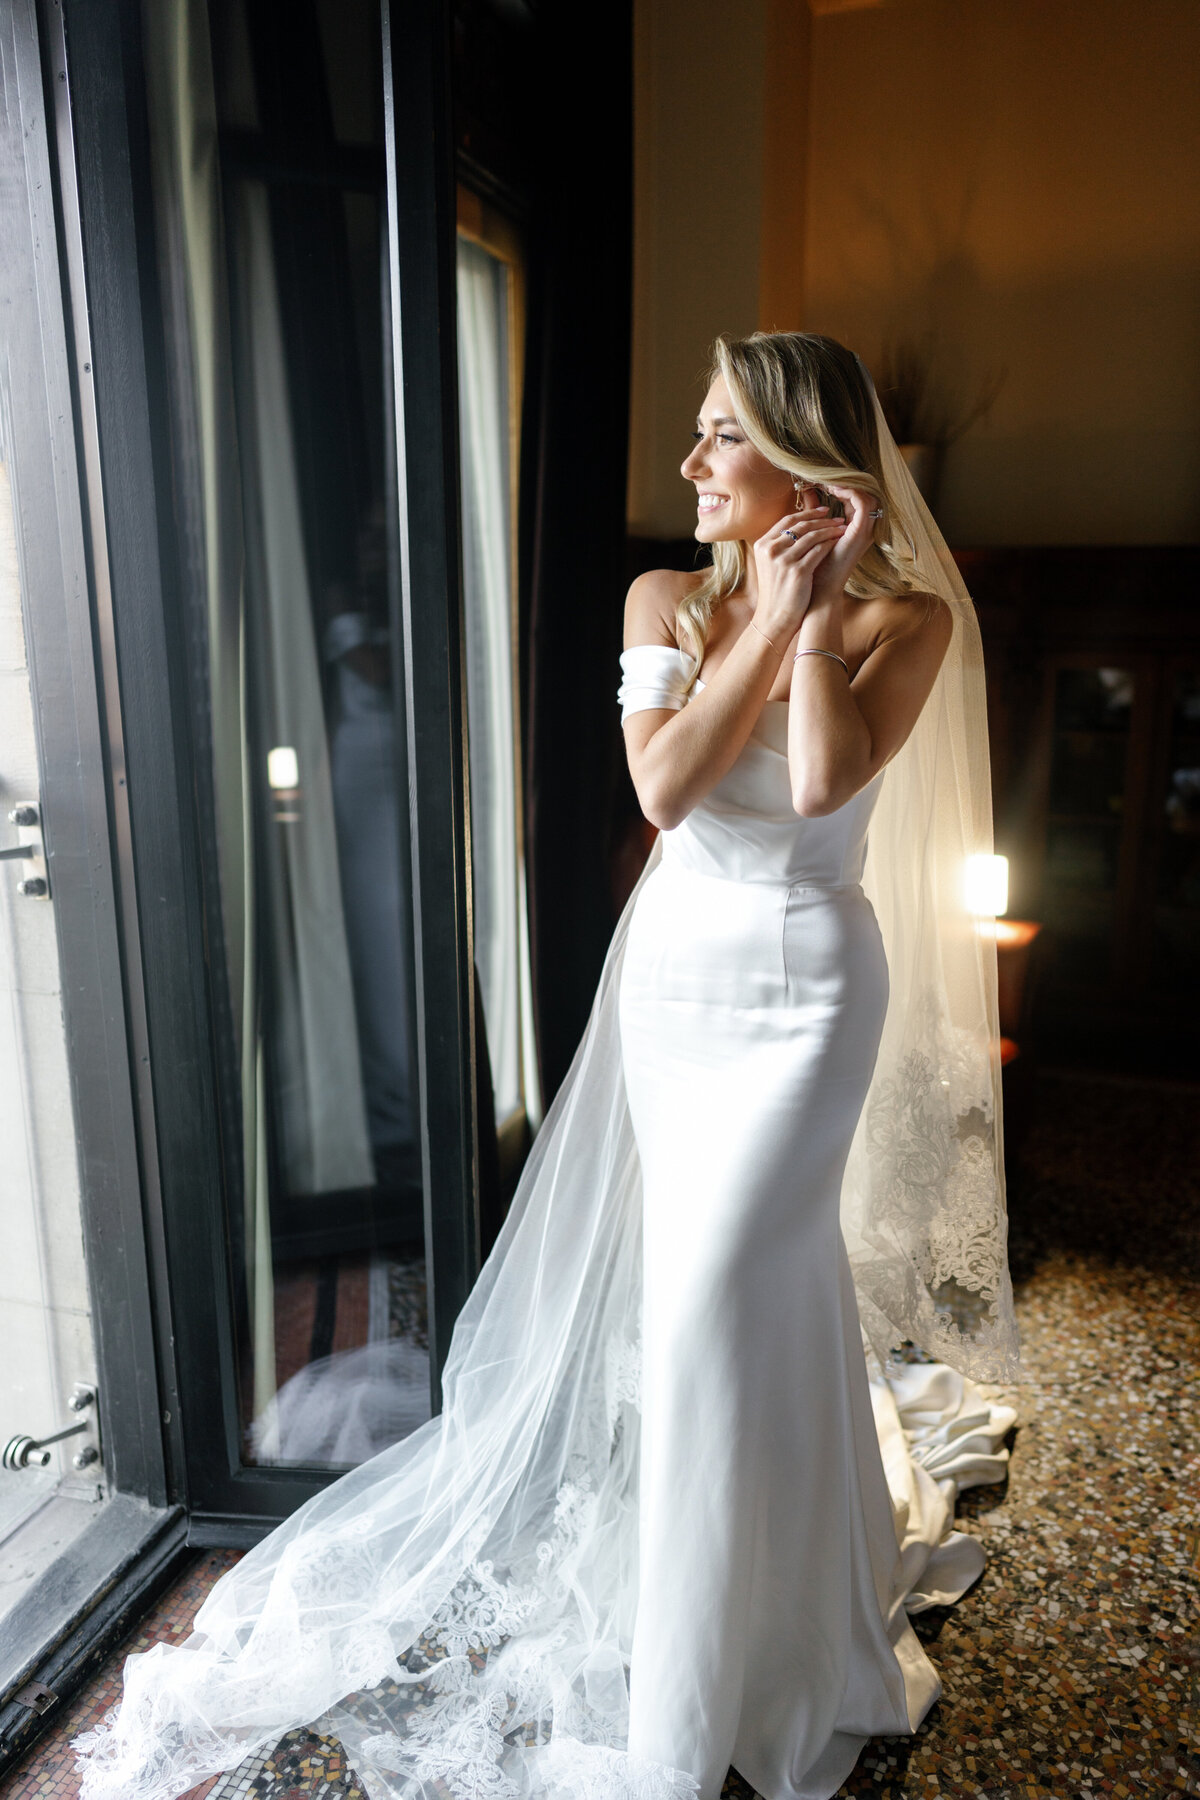 Aspen-Avenue-Chicago-Wedding-Photographer-Chicago-Athletic-Association-Simplicitee-XO-Design-Co-St-Mary-of-the-Angels-Church-Anomalie-Beauty-Timeless-Vogue-113